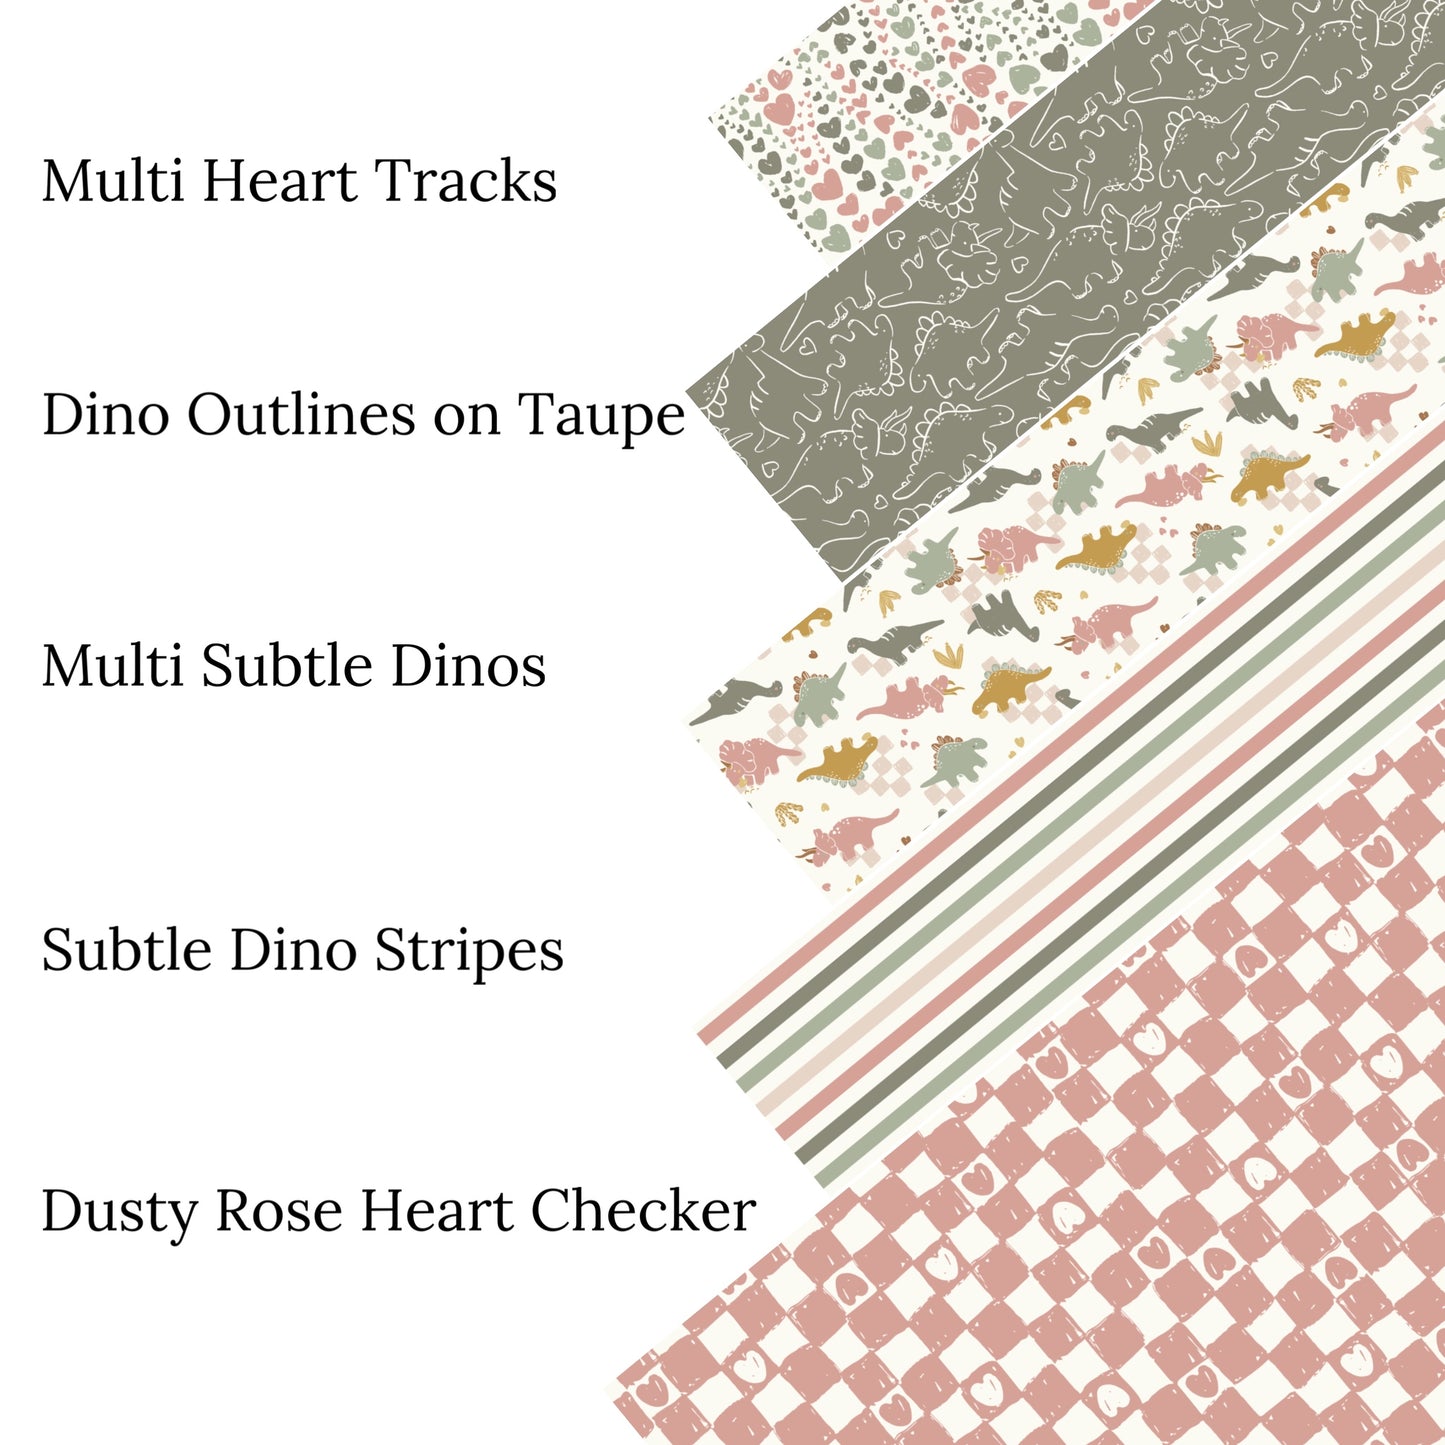 Dino Outlines on Taupe Faux Leather Sheets